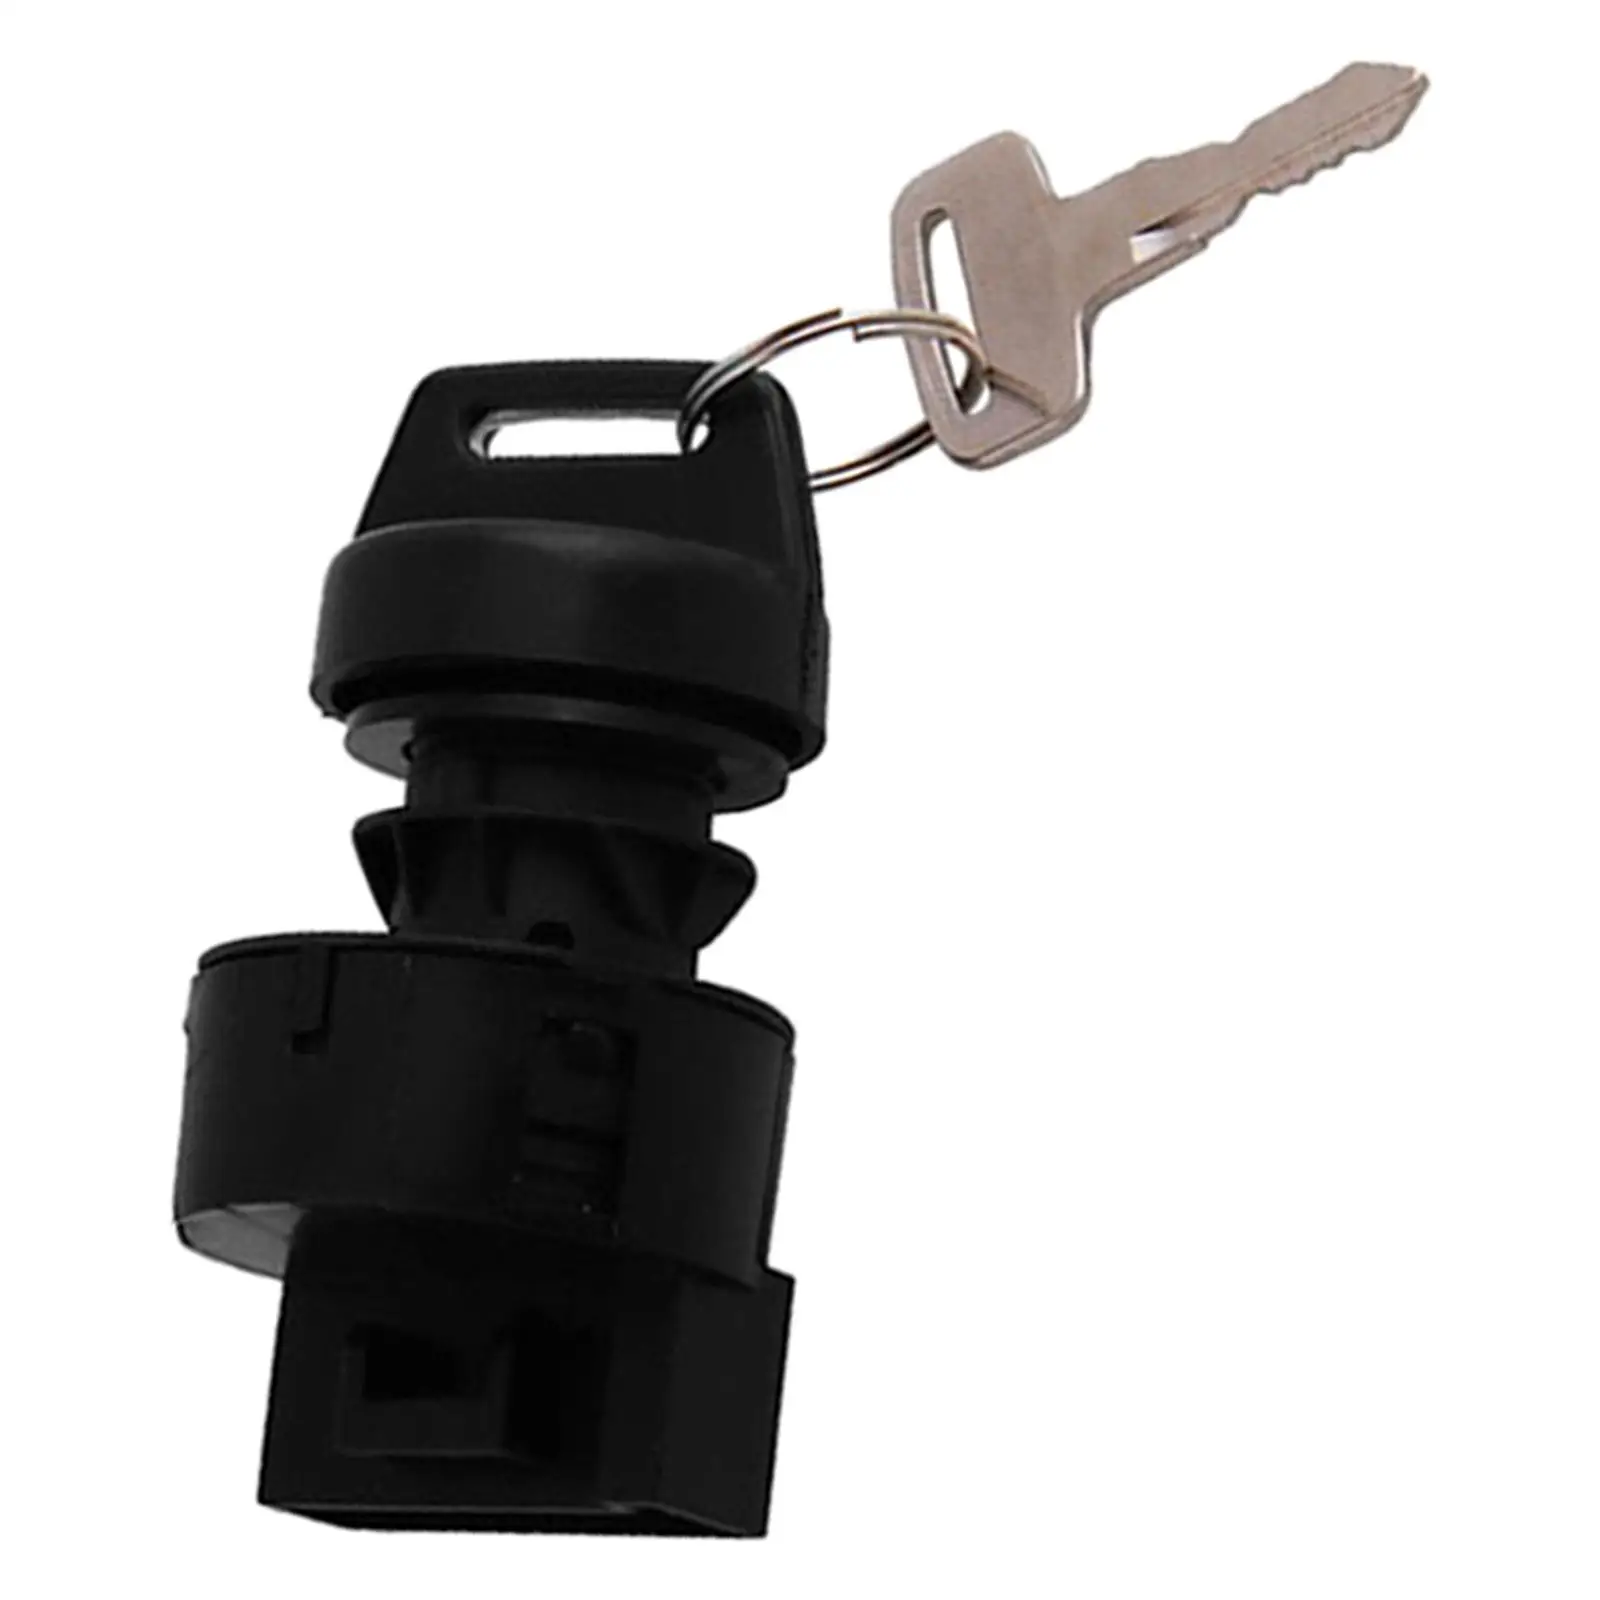 Motorcycle Ignition Key Switch, Parts 4012164 4010390 4012165 Off / Run /11002 Keyswitch Fit for  500 1000 400